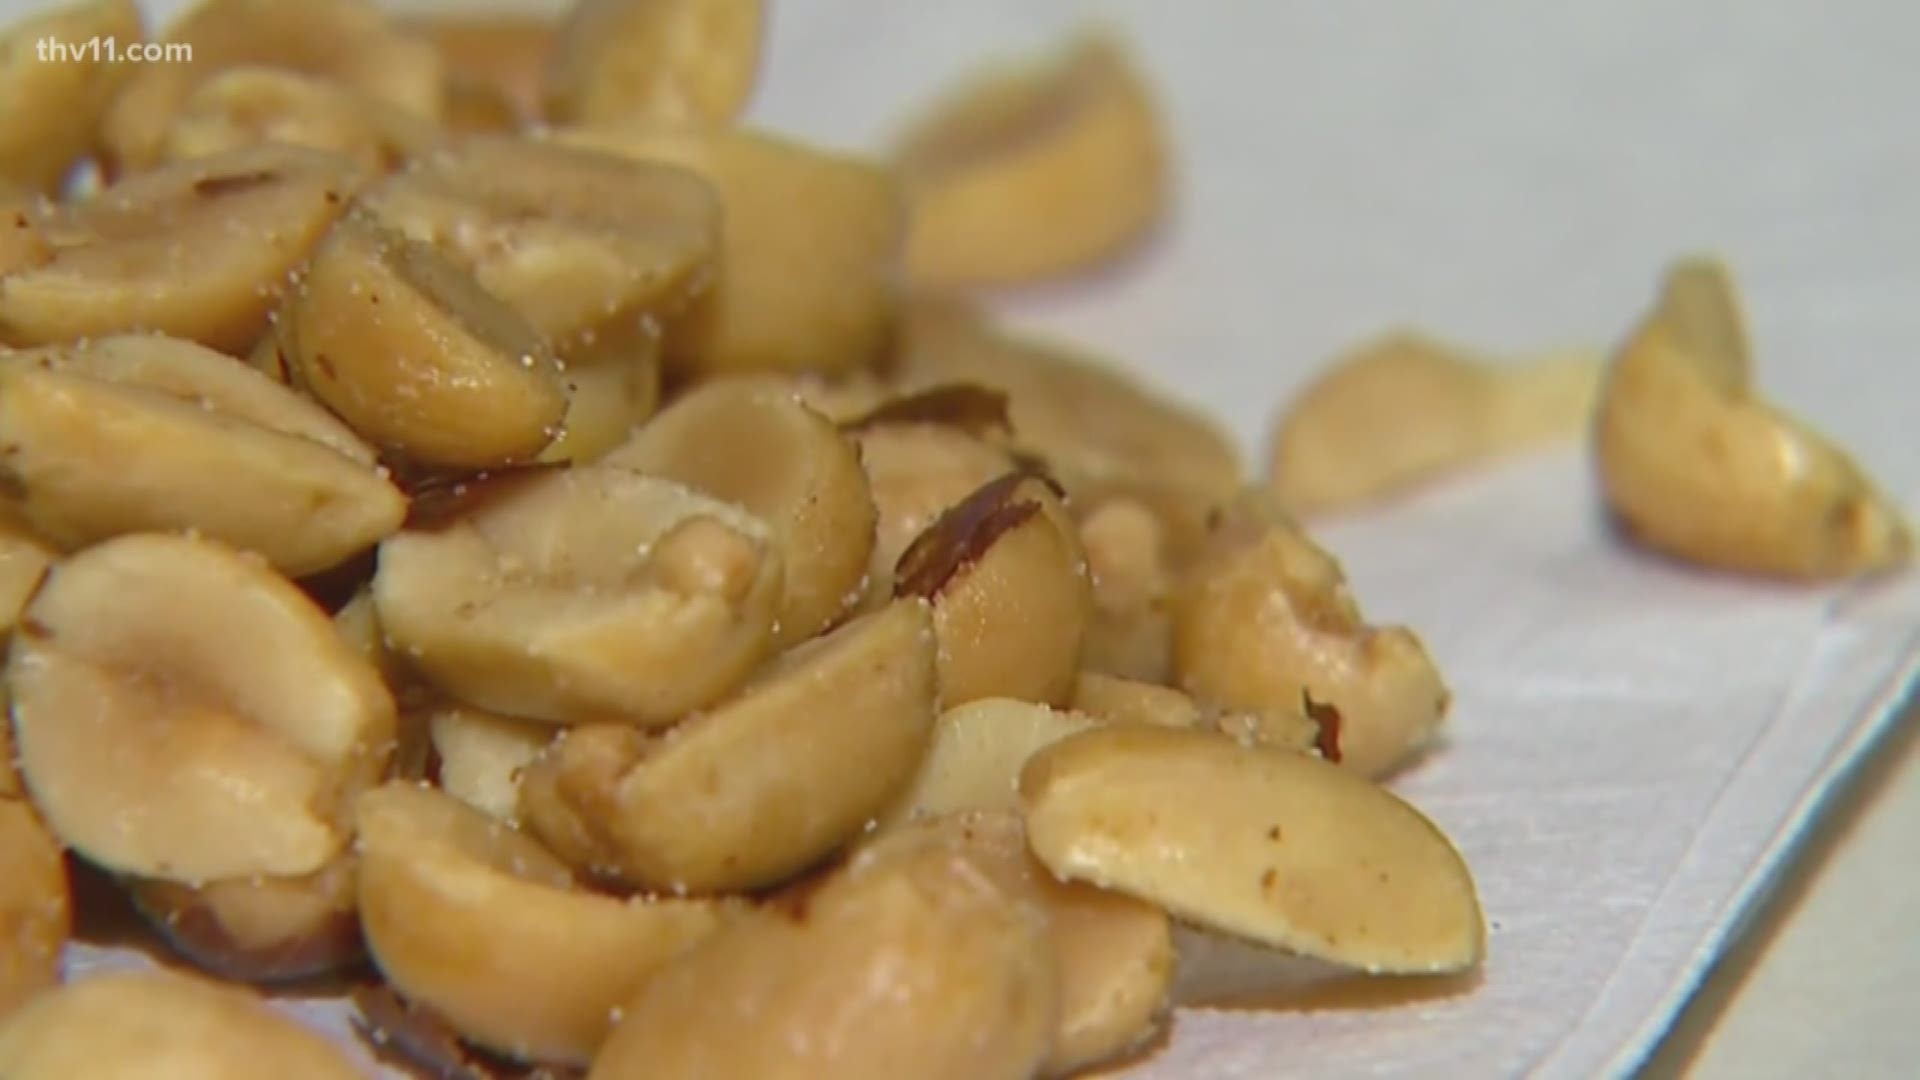 It's a treatment for life-threatening peanut allergies.